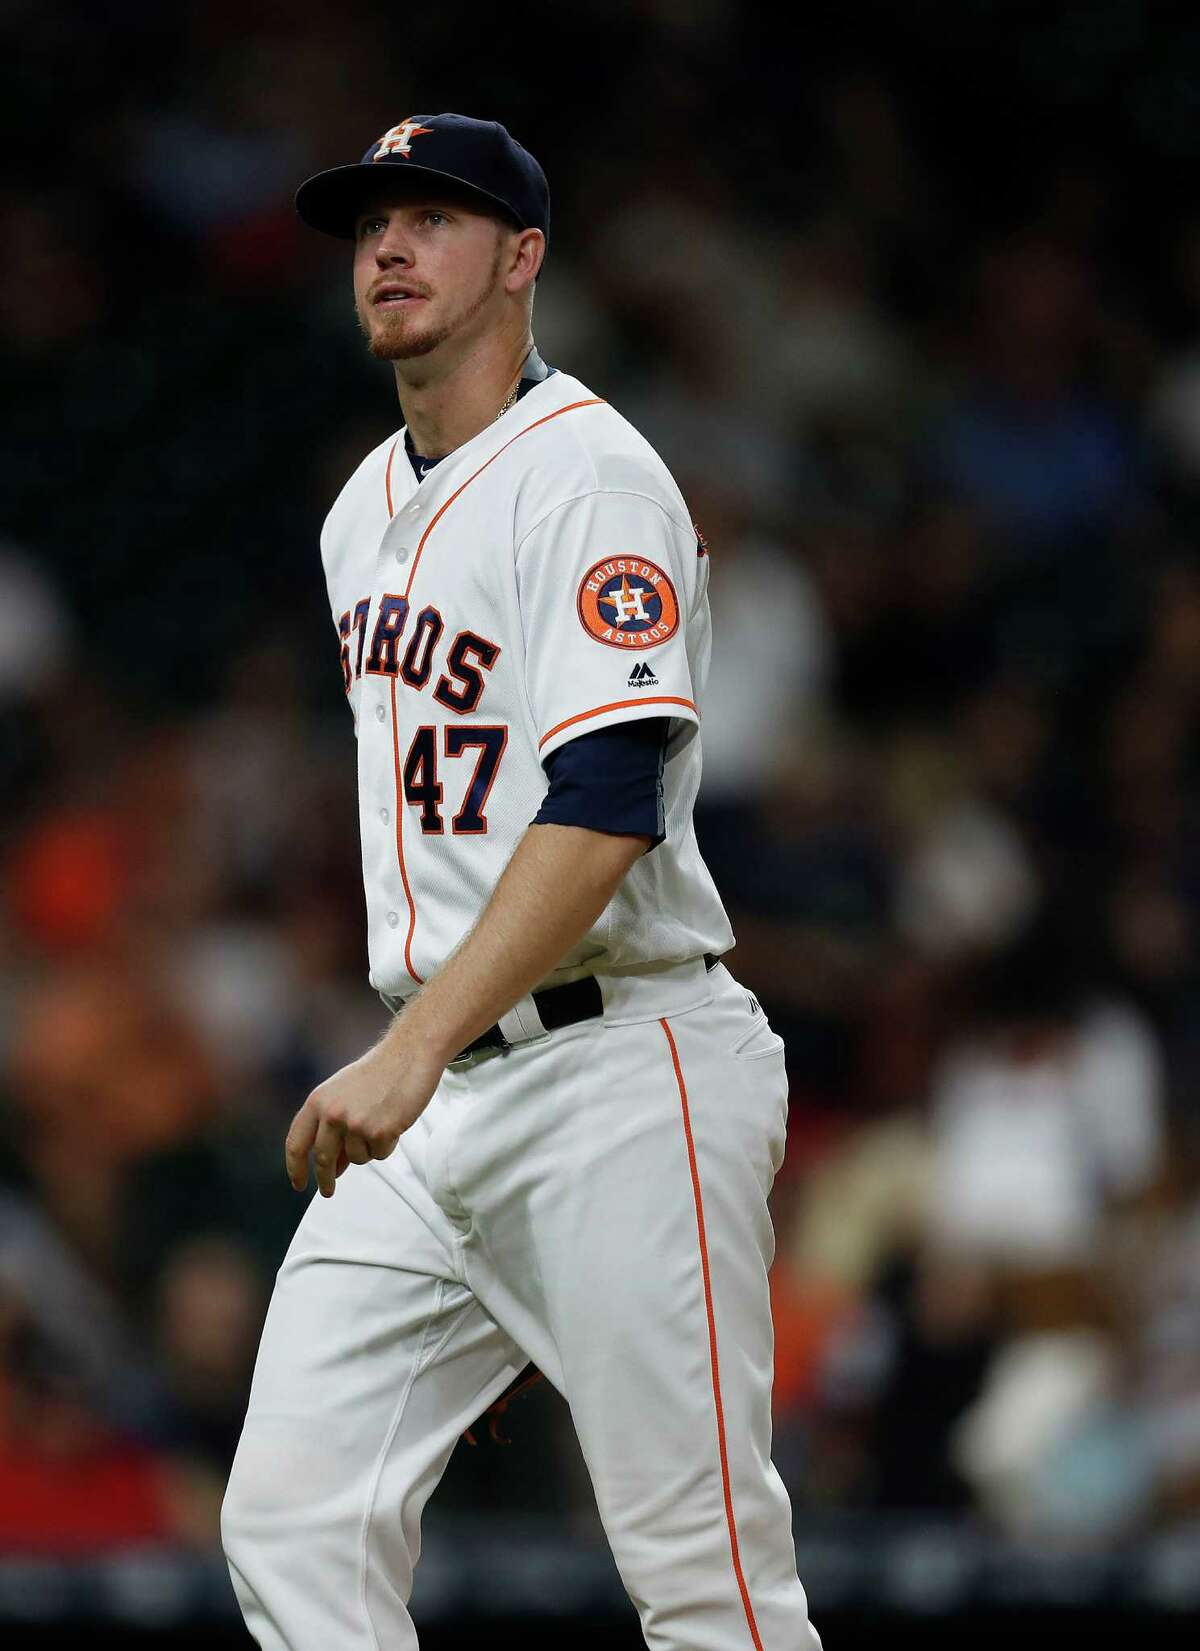 Houston Astros relief pitcher Chris Devenski (47) reacts after striking out Seattle Mariners Nelson Cruz to get out of the seventh inning of an MLB game at Minute Maid Park, Tuesday, Sept. 27, 2016 in Houston.